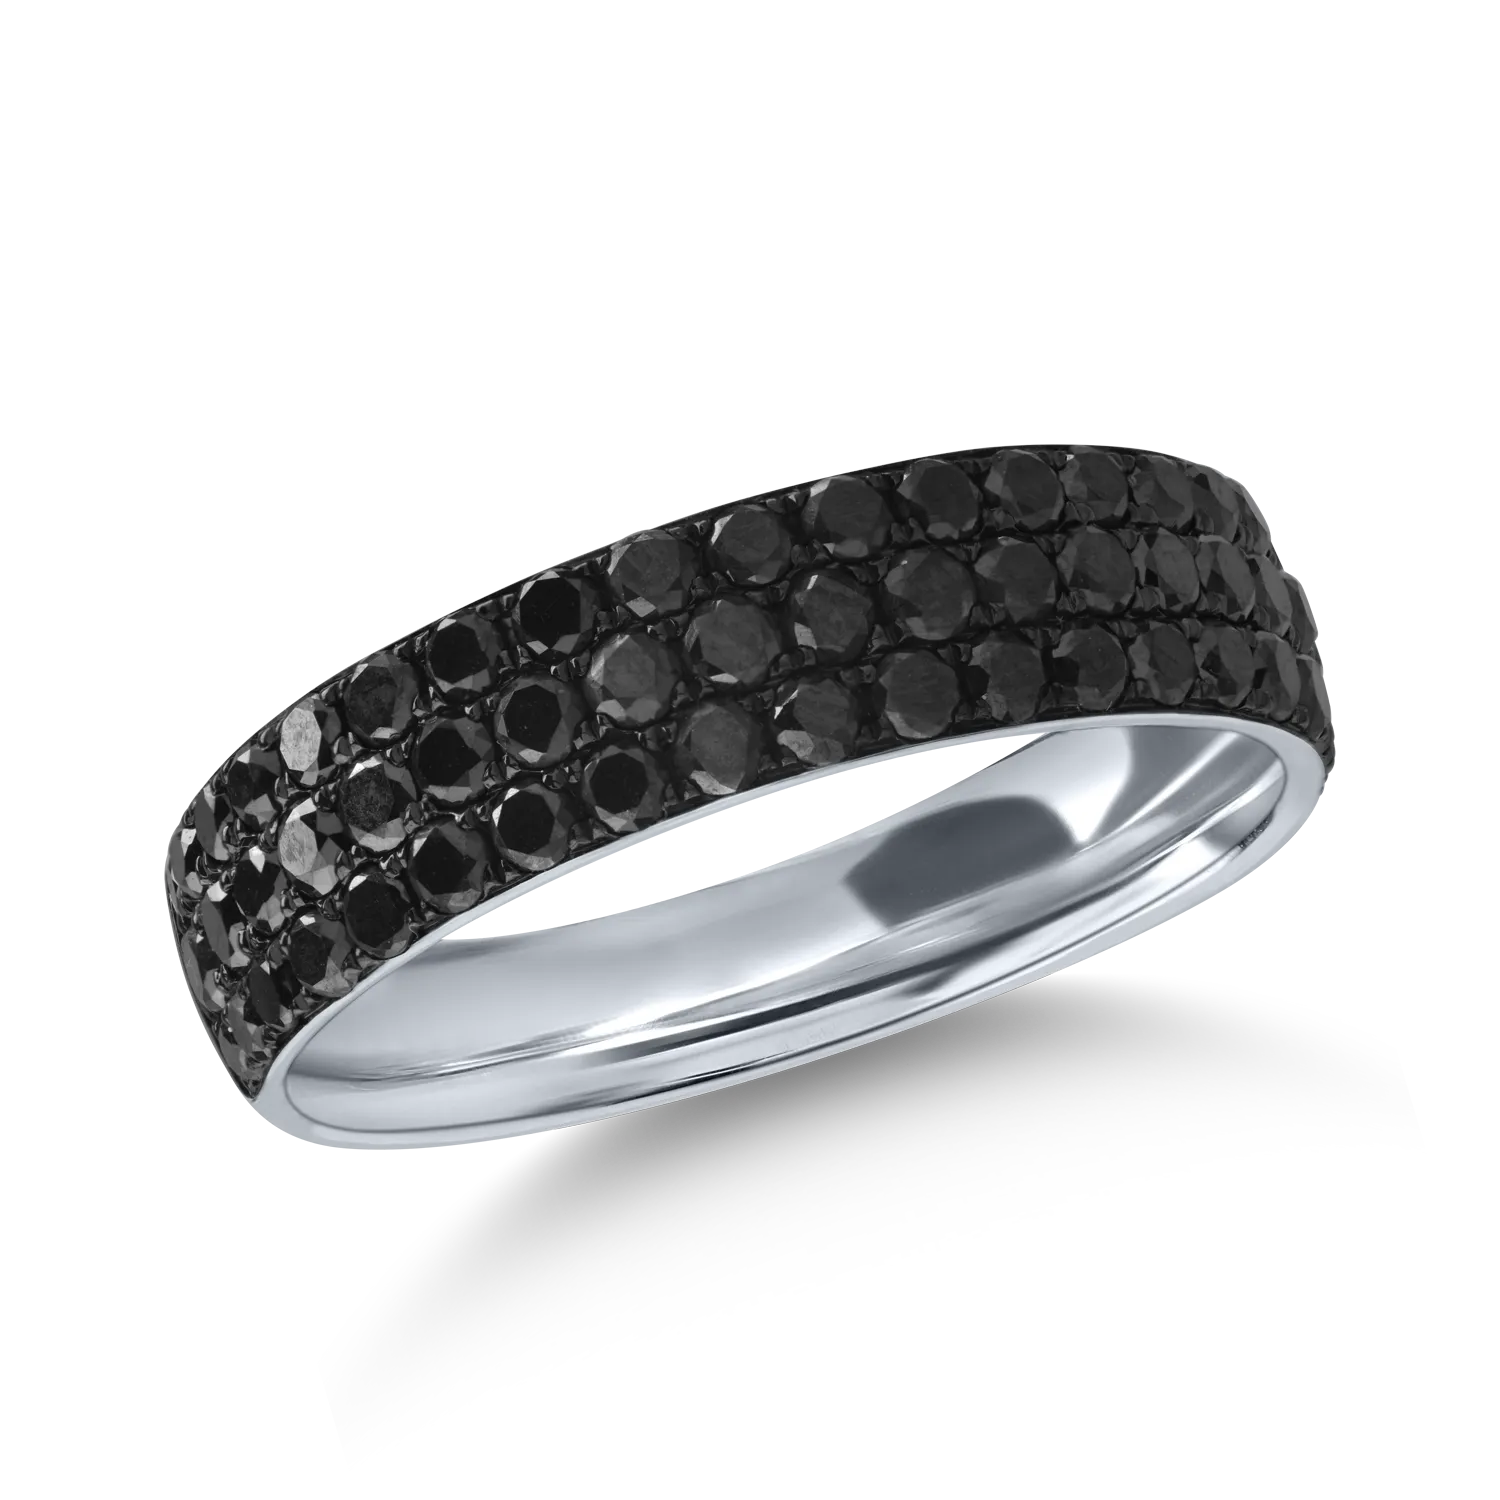 Half eternity ring in white gold with 1.12ct black diamonds